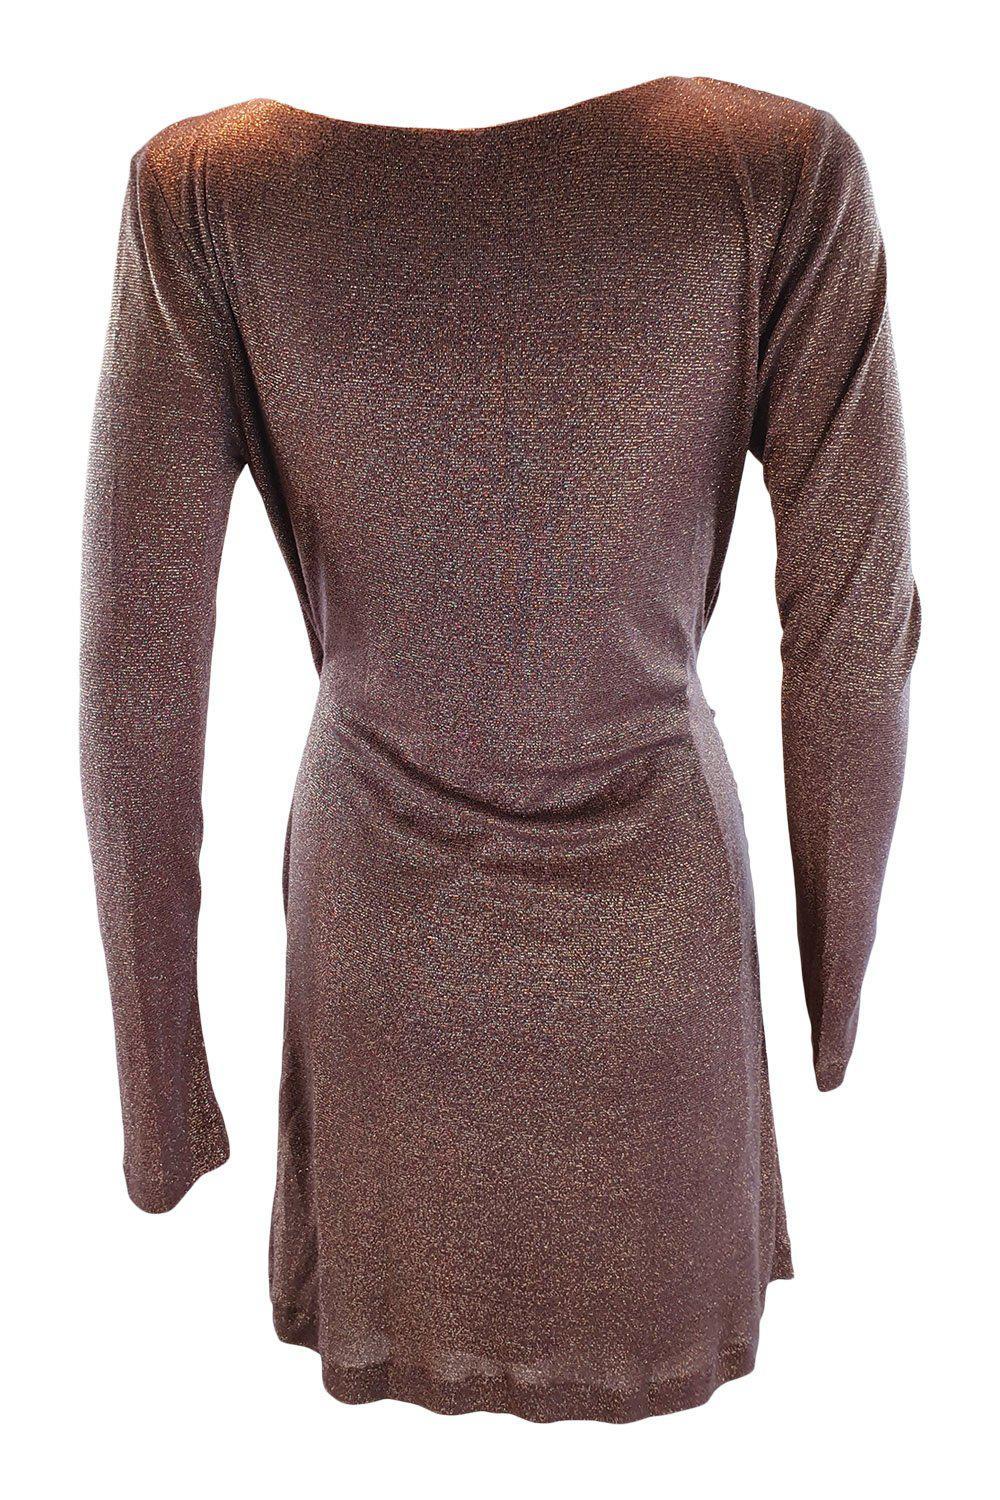 HALSTON HERITAGE Brown Glittery Lurex Long Sleeve Faux Wrap Dress (8)-Halston Heritage-The Freperie